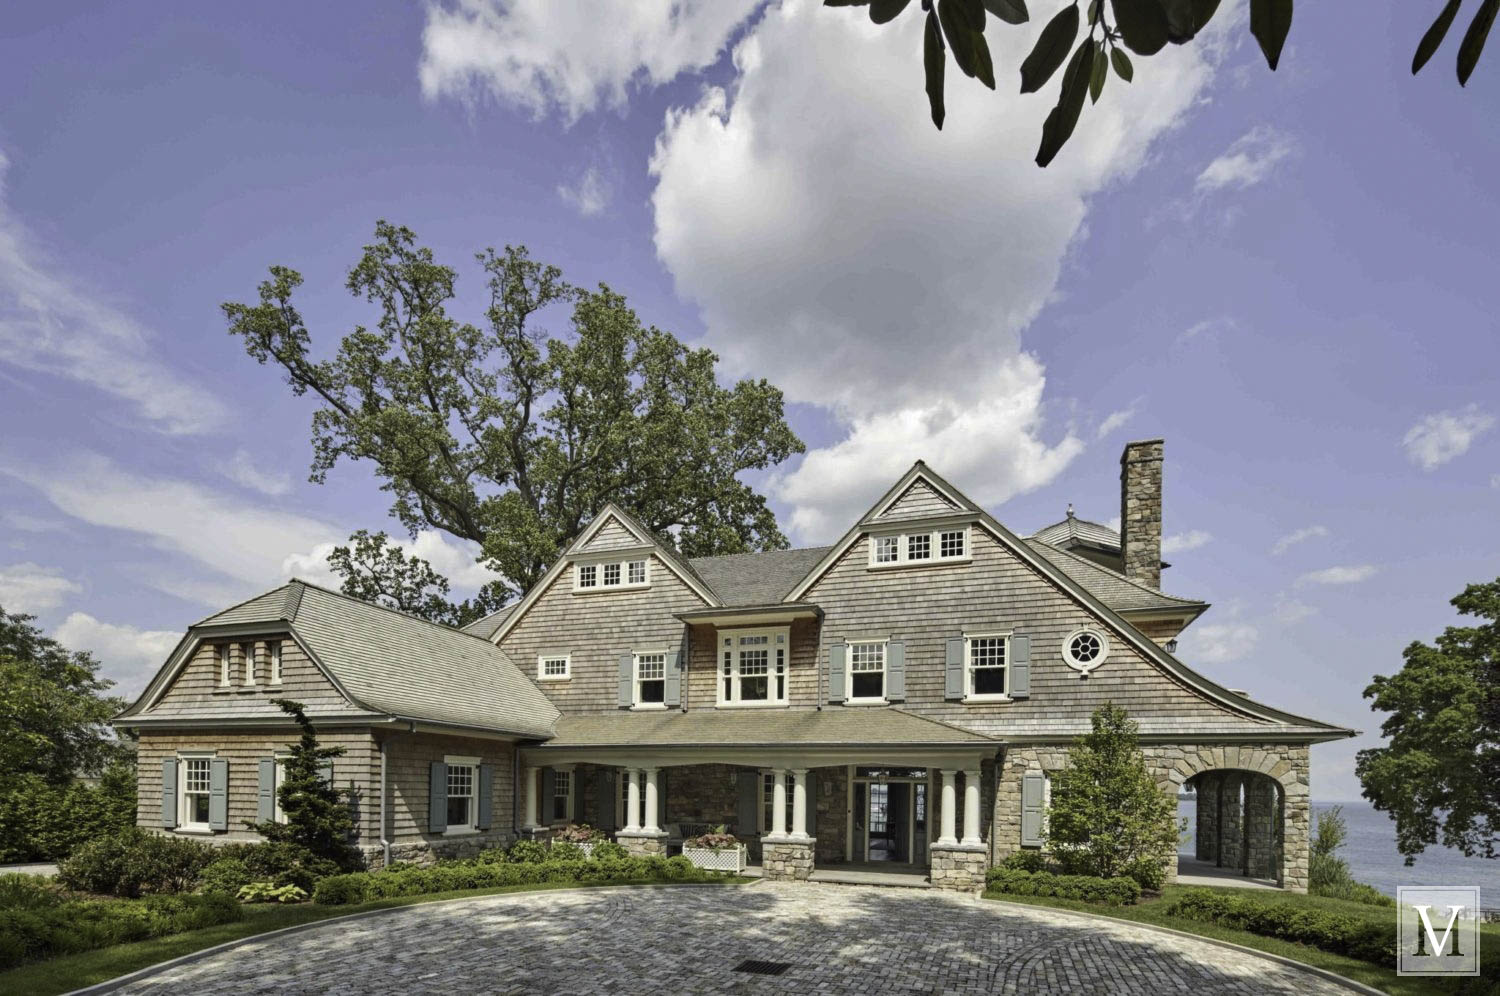 Vanderhorn Architects-Designed Shingle Style Gets Starring Role in